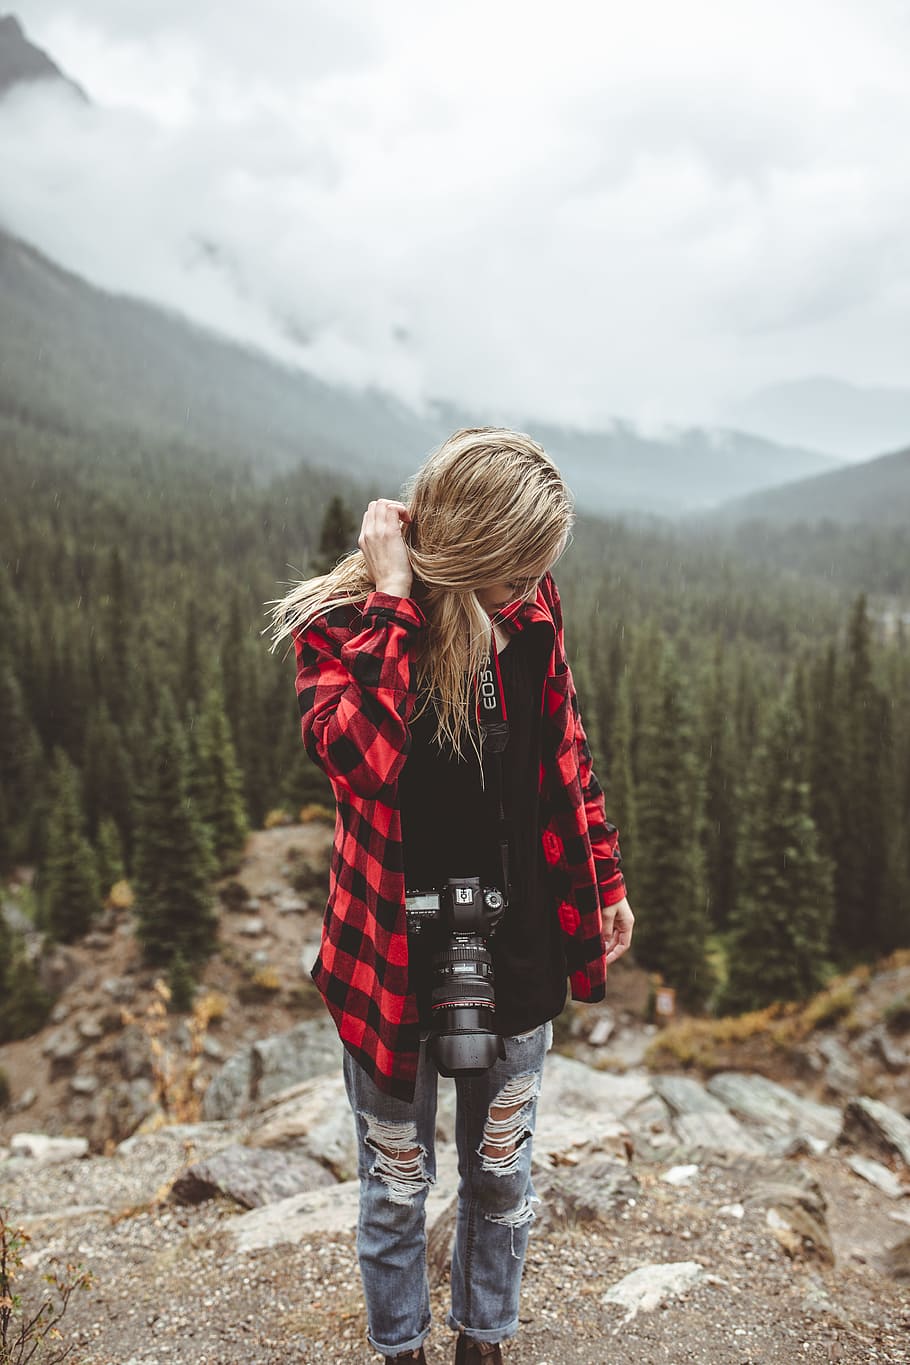 girl, blonde, woman, hair, camera, photographer, hipster, flannel, mountains, mountain